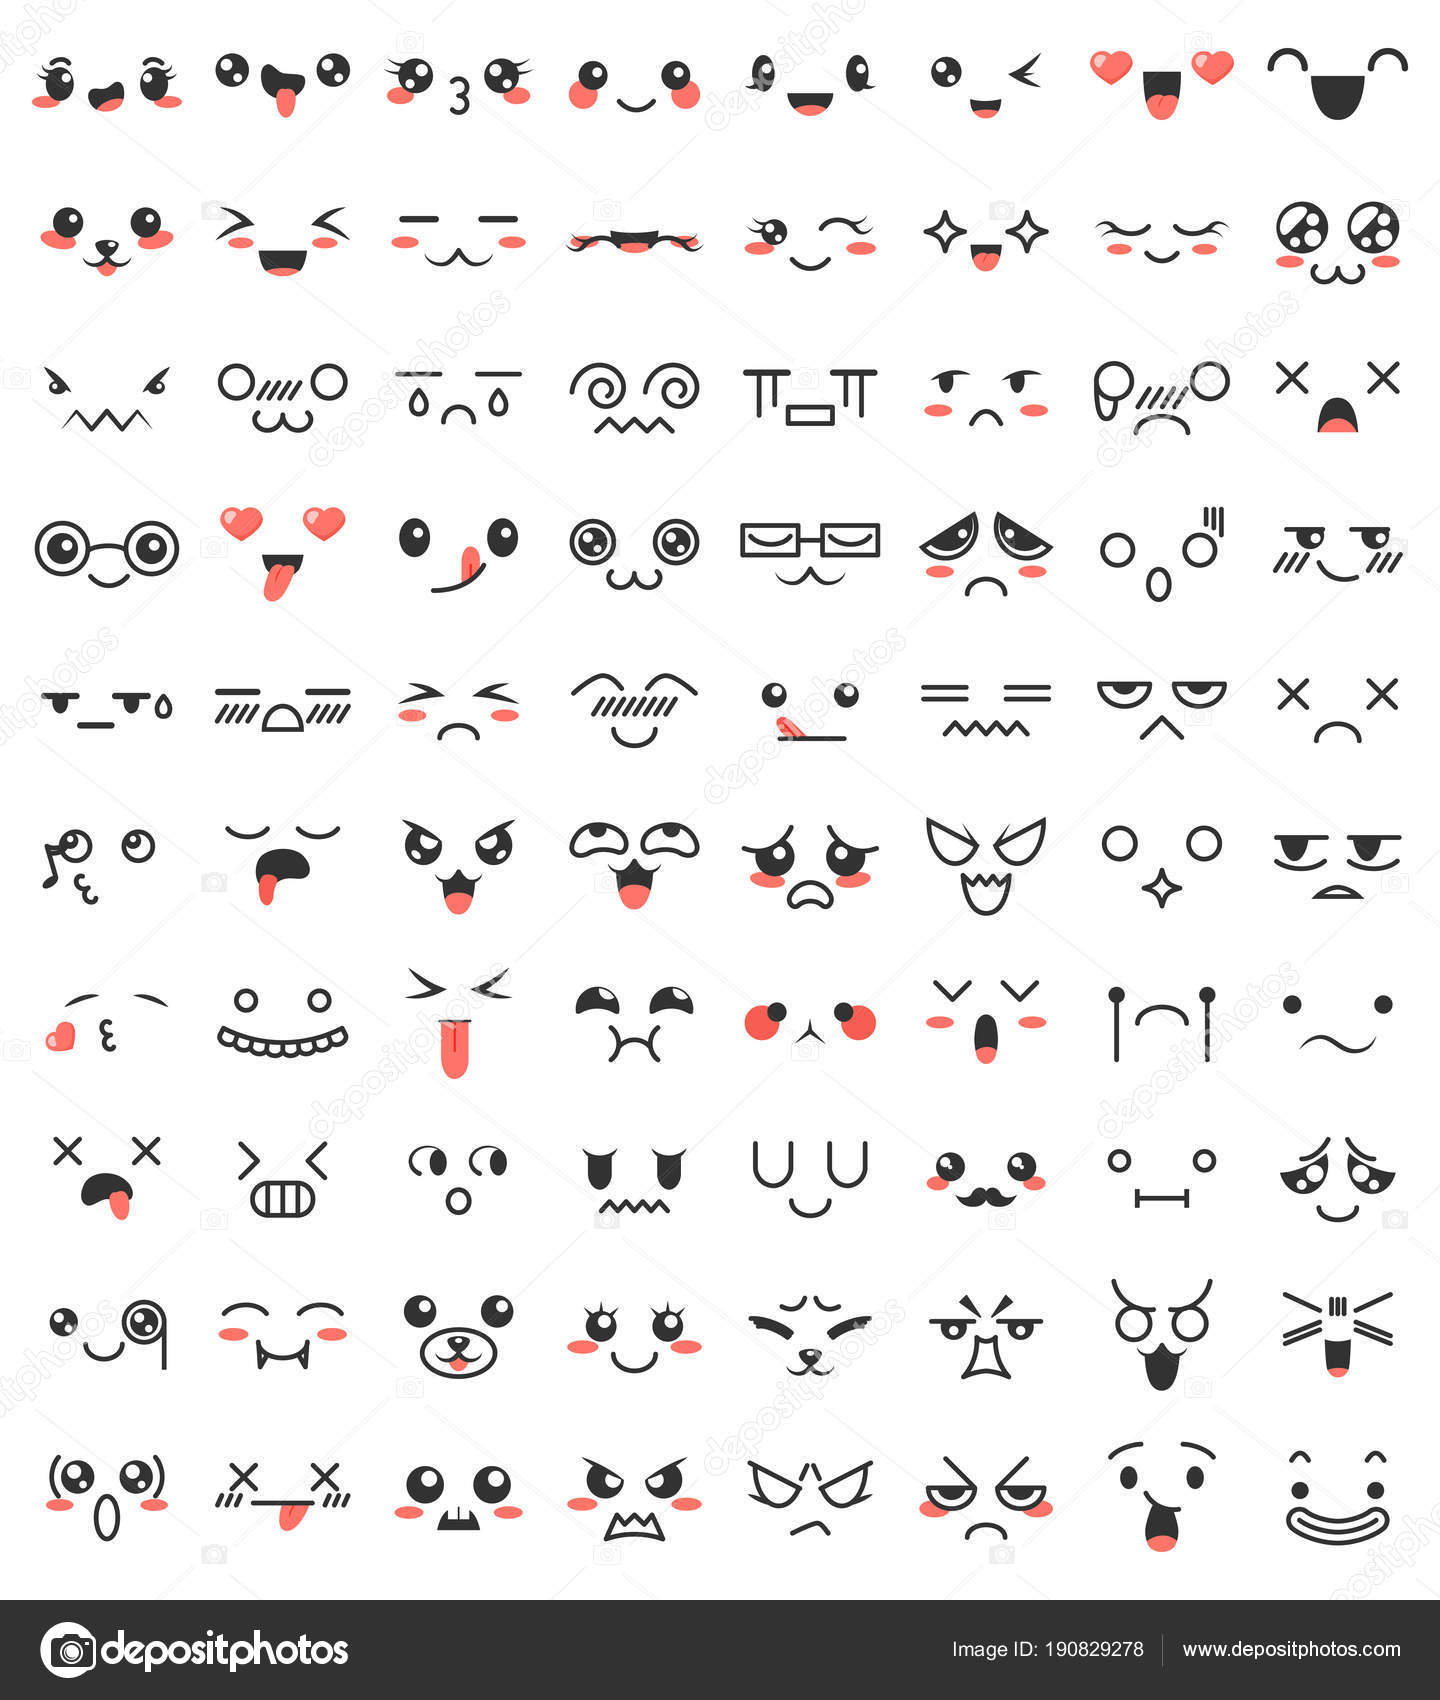 Set of Kawaii Cartoon Style Doodle Sweety Characters. Collection